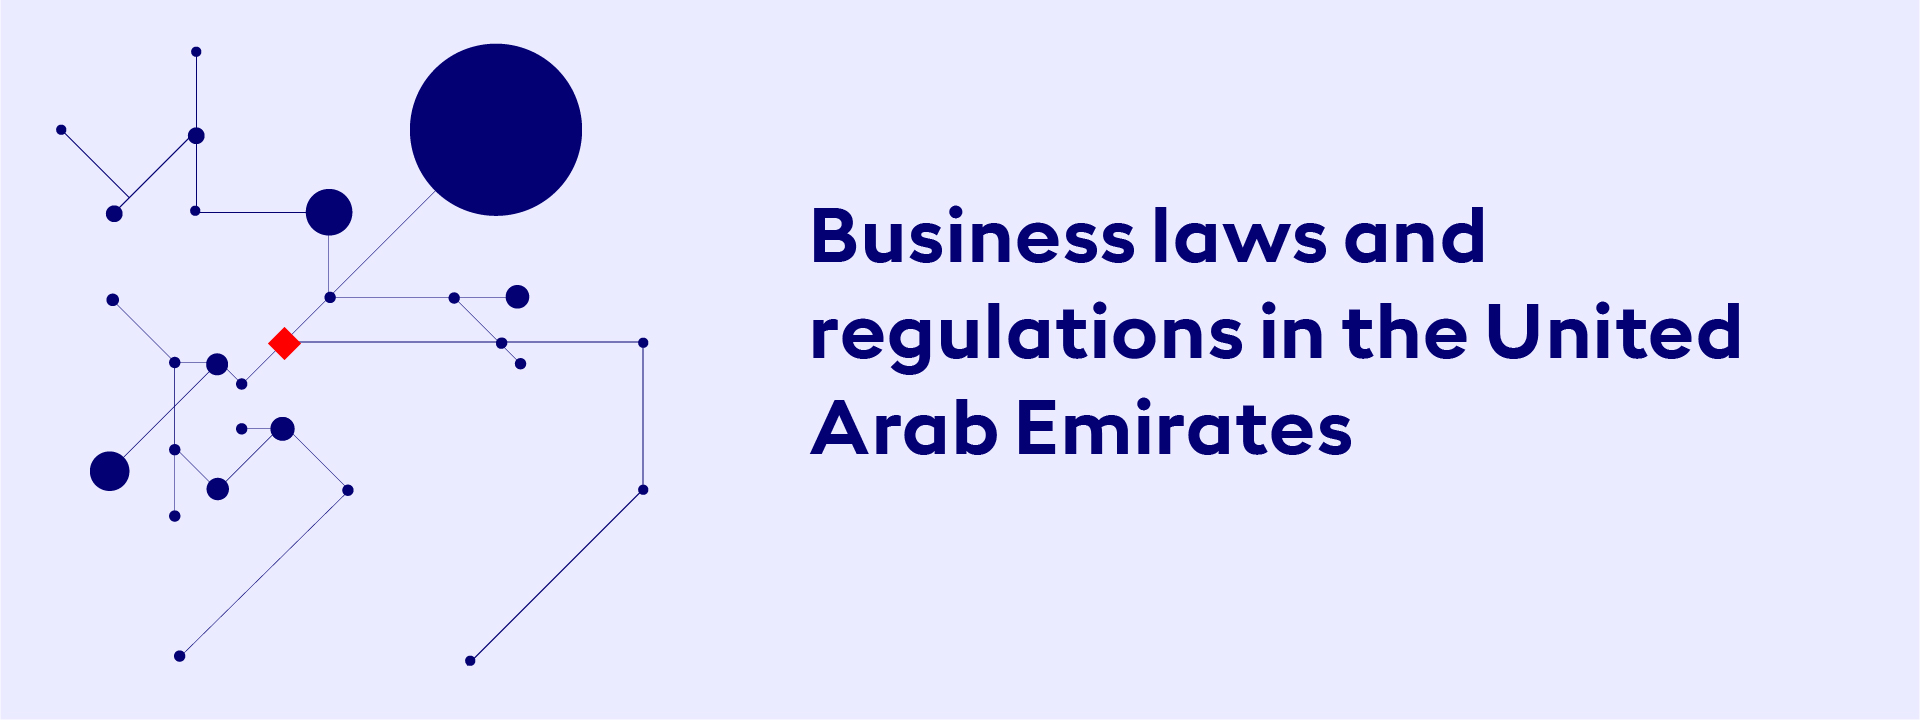 Business laws and regulations in the United Arab Emirates